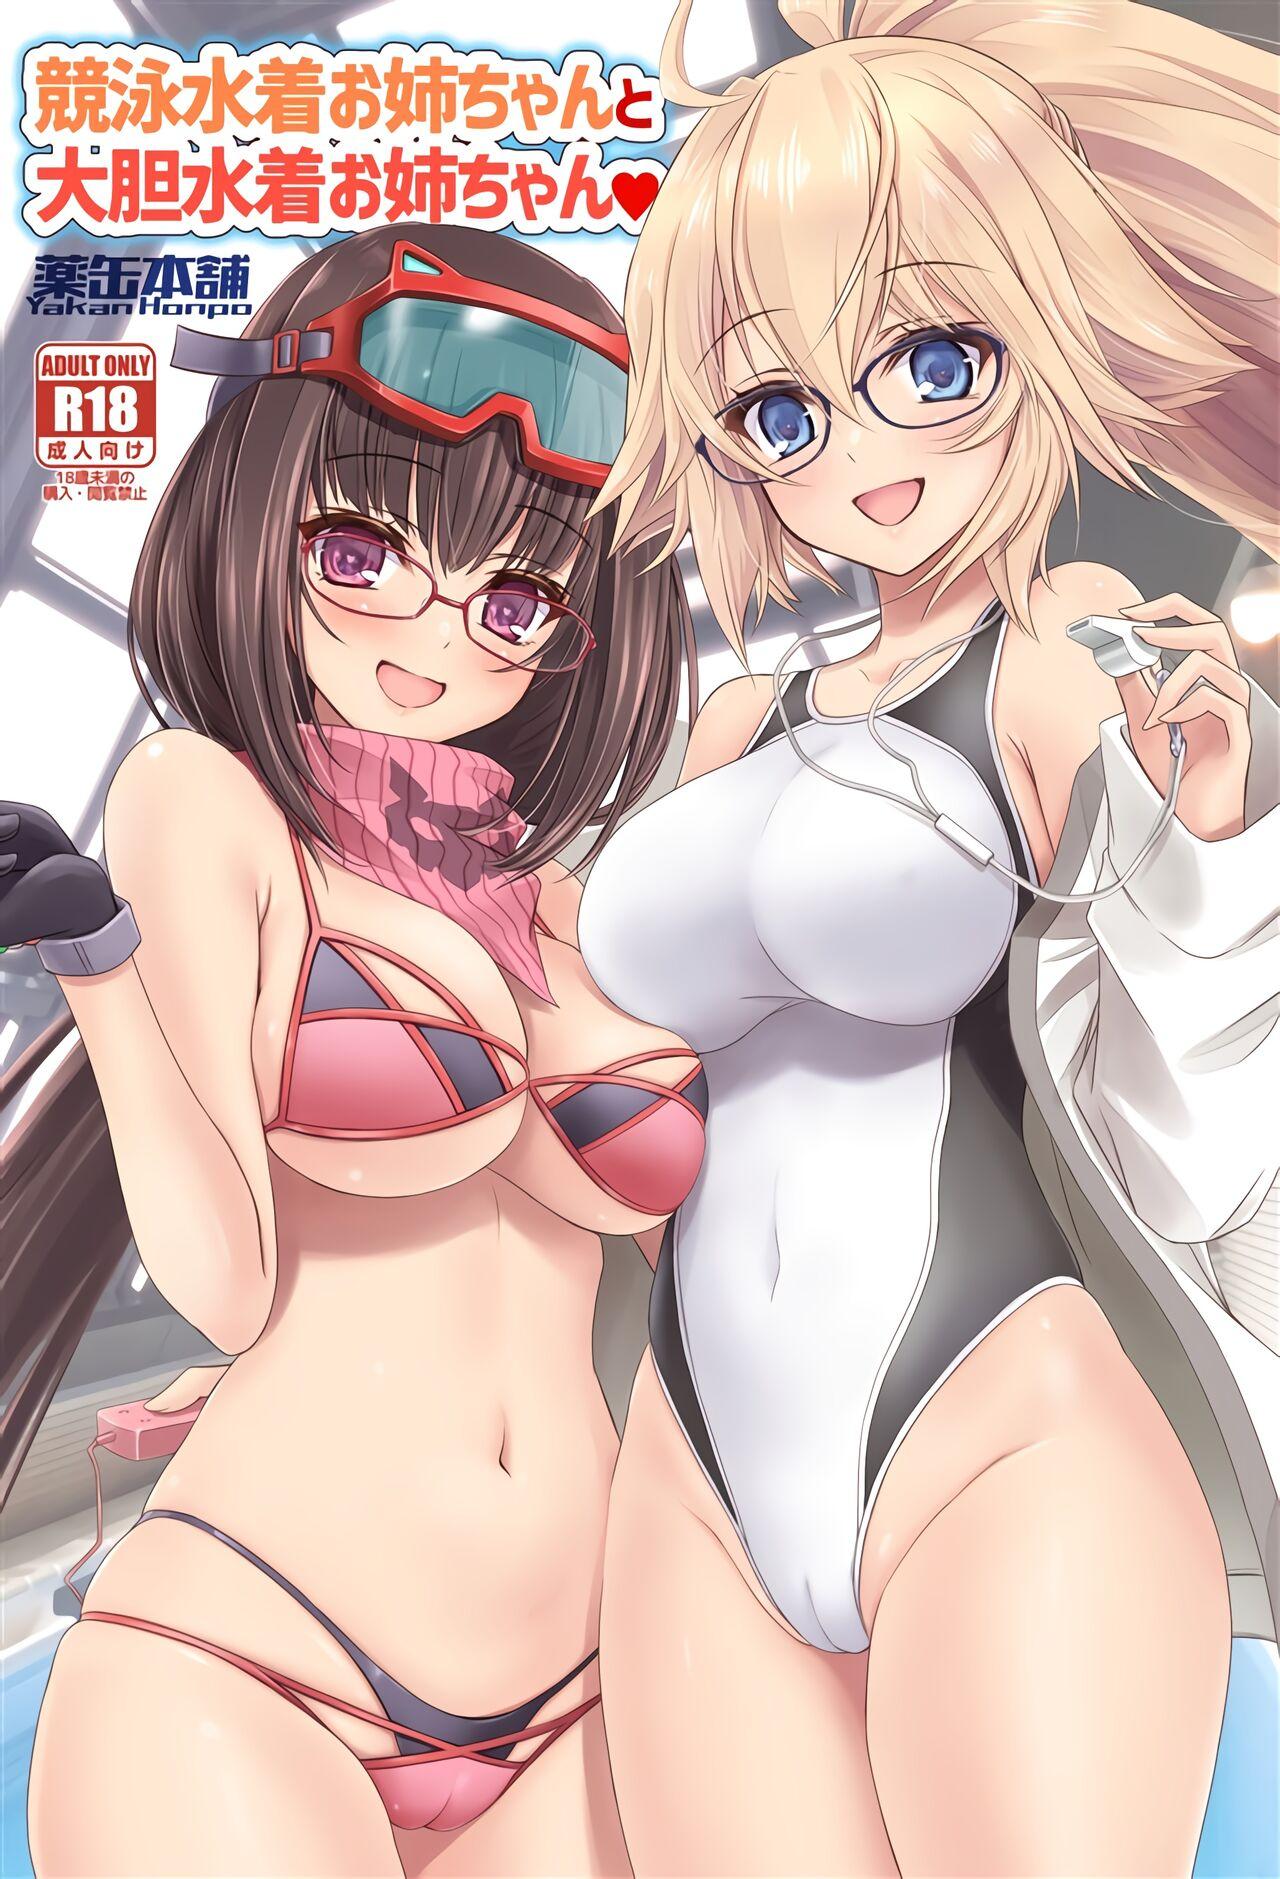 This (CT41) [Yakan Honpo (Inoue Tommy)] Kyouei Mizugi Onee-chan to Daitan Mizugi Onee-chan (Fate/Grand Order) [Chinese] [不咕鸟汉化组] - Fate grand order 18 Year Old Porn - Page 1